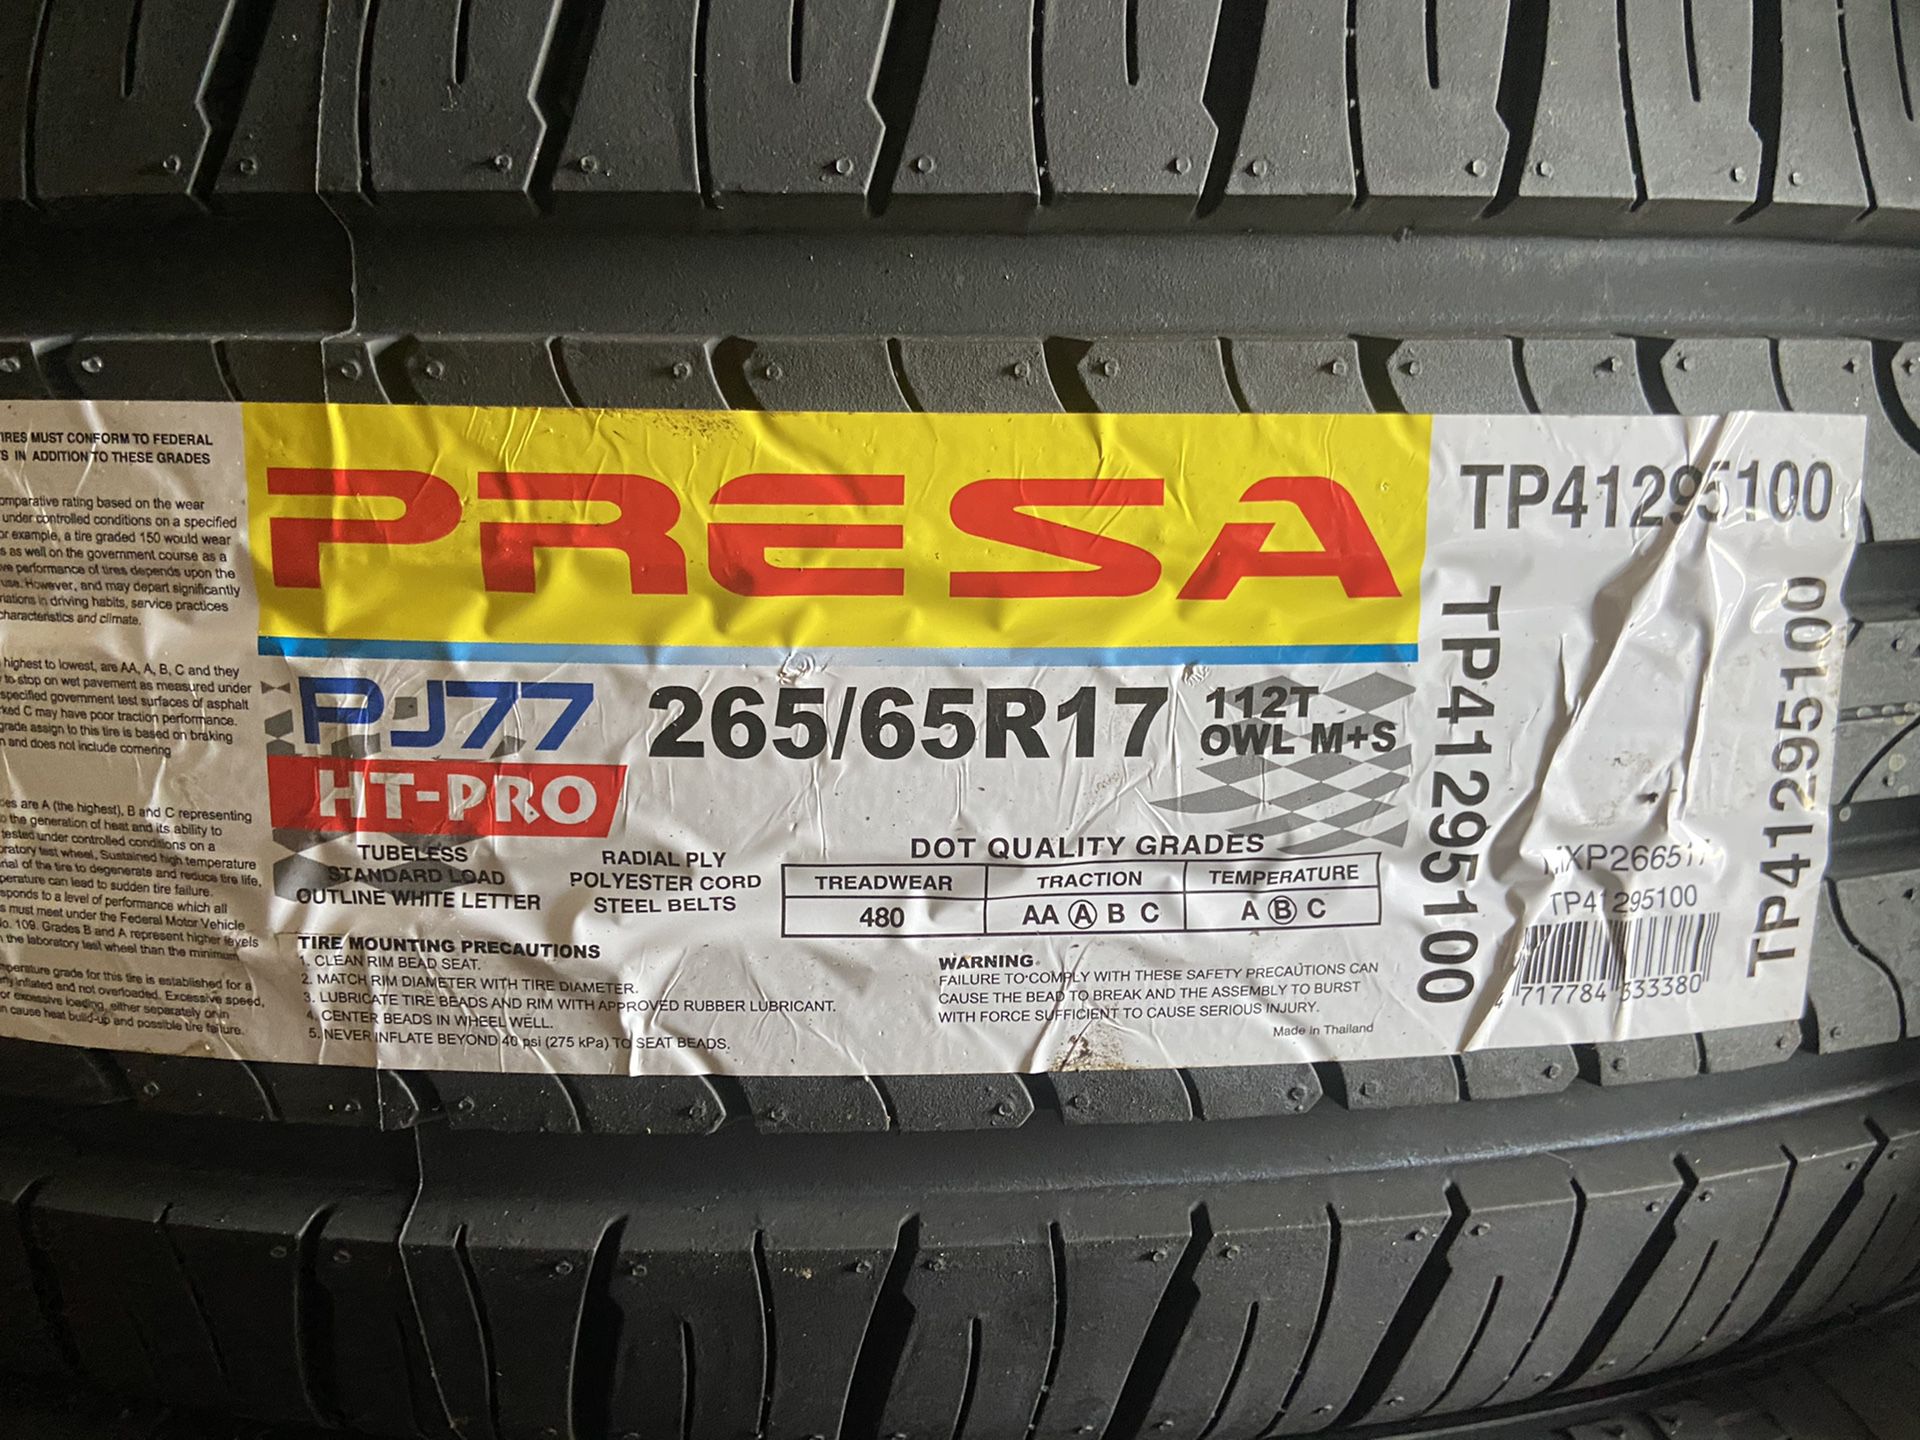 X4 (265 65 17) presa tires! $450.37, out the door, mounting, balancing, installation and alignment included!